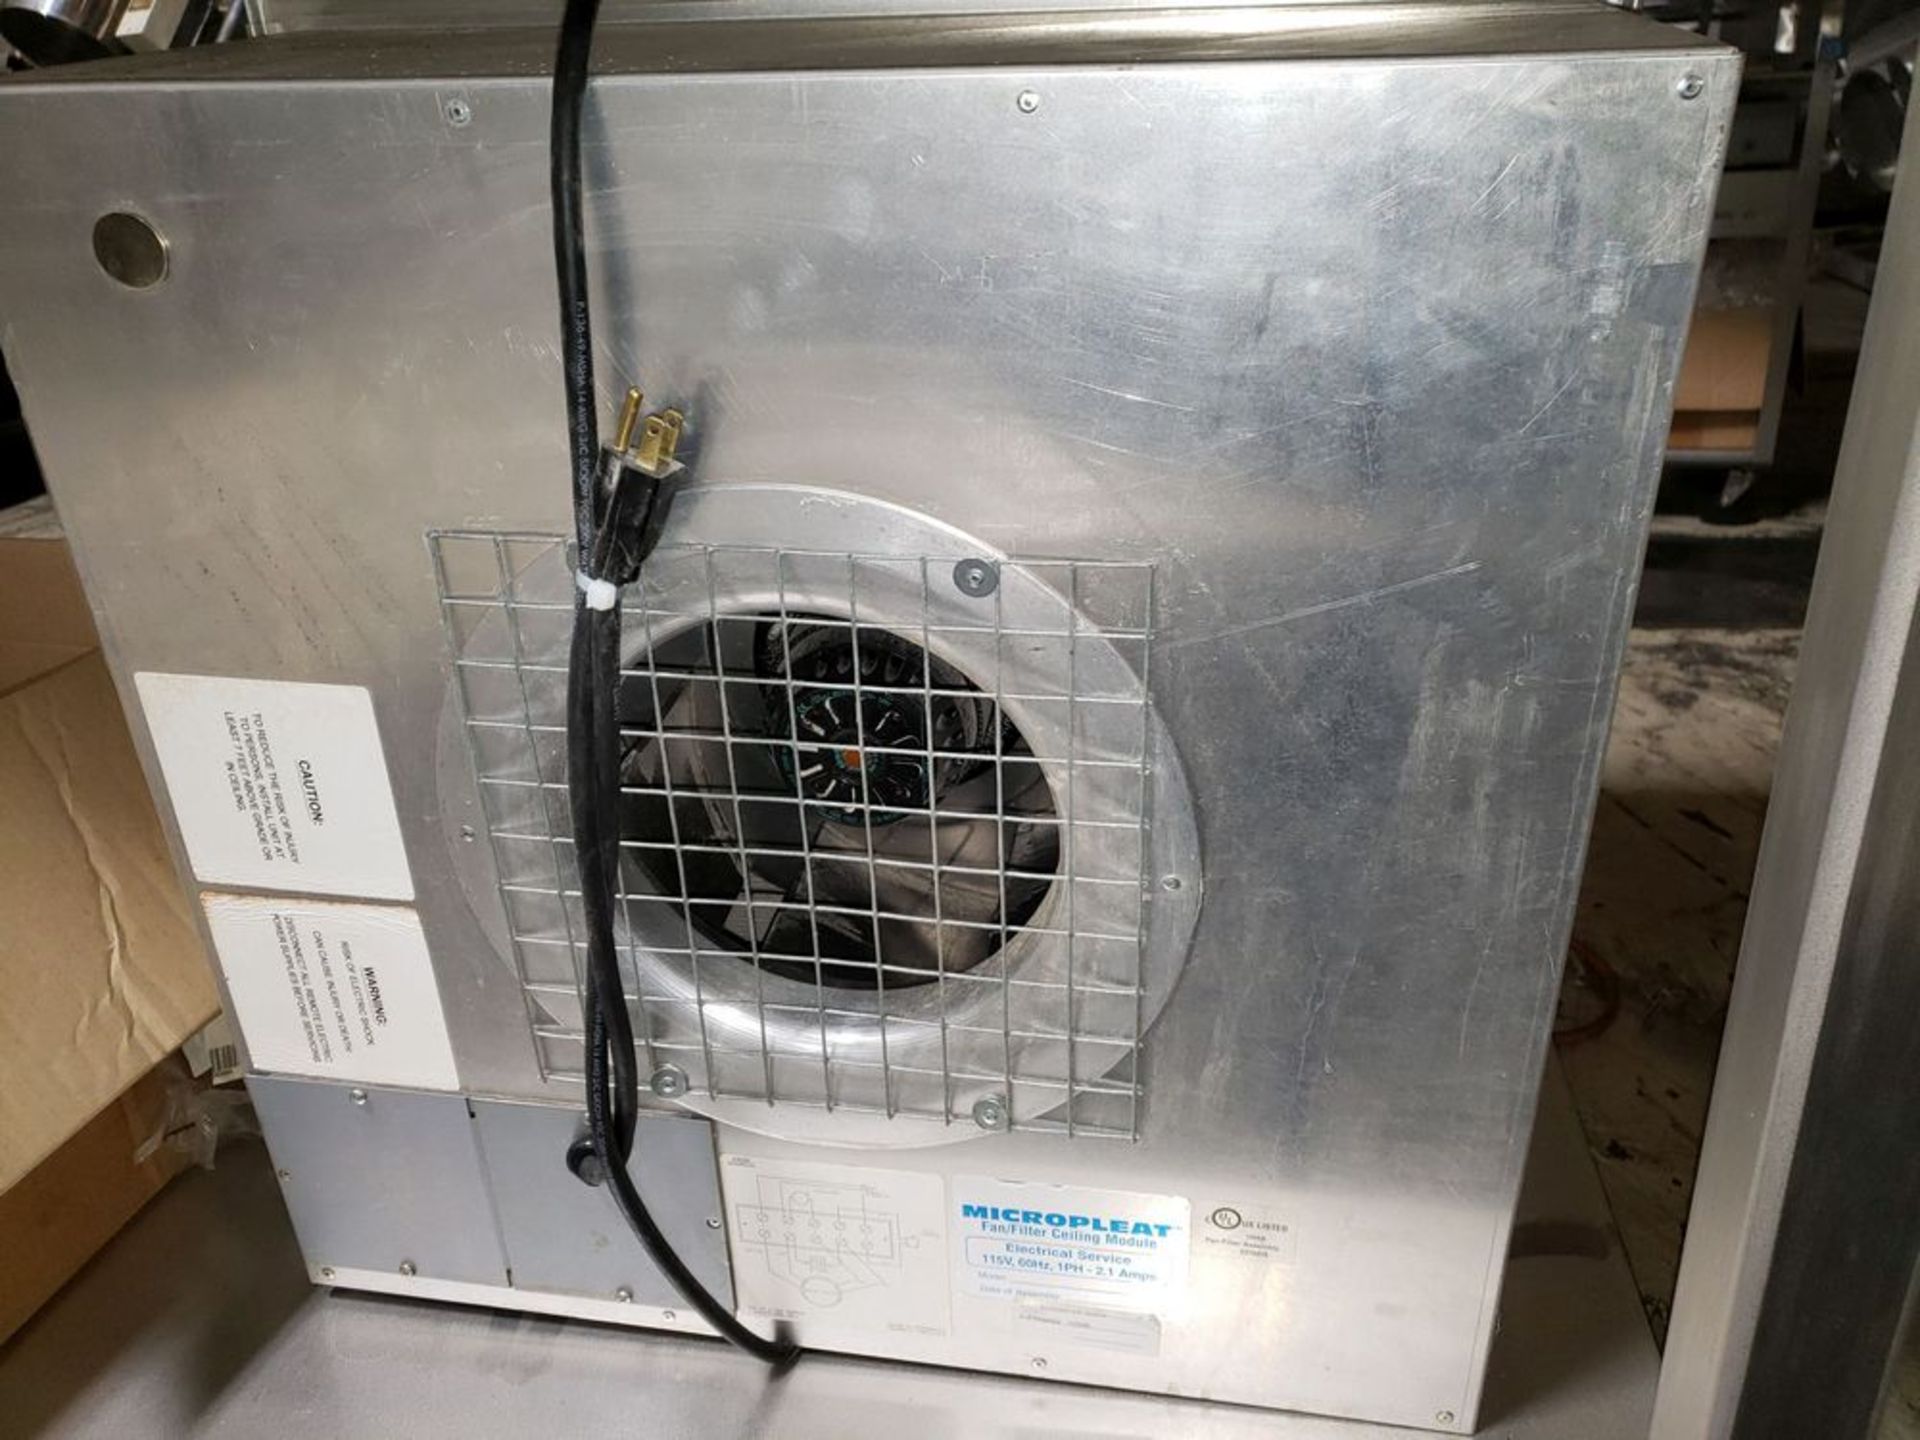 Airguard HEPA filter, type Micropleat, model H2323W55, with blower, 290 cfm, serial# 2997943.